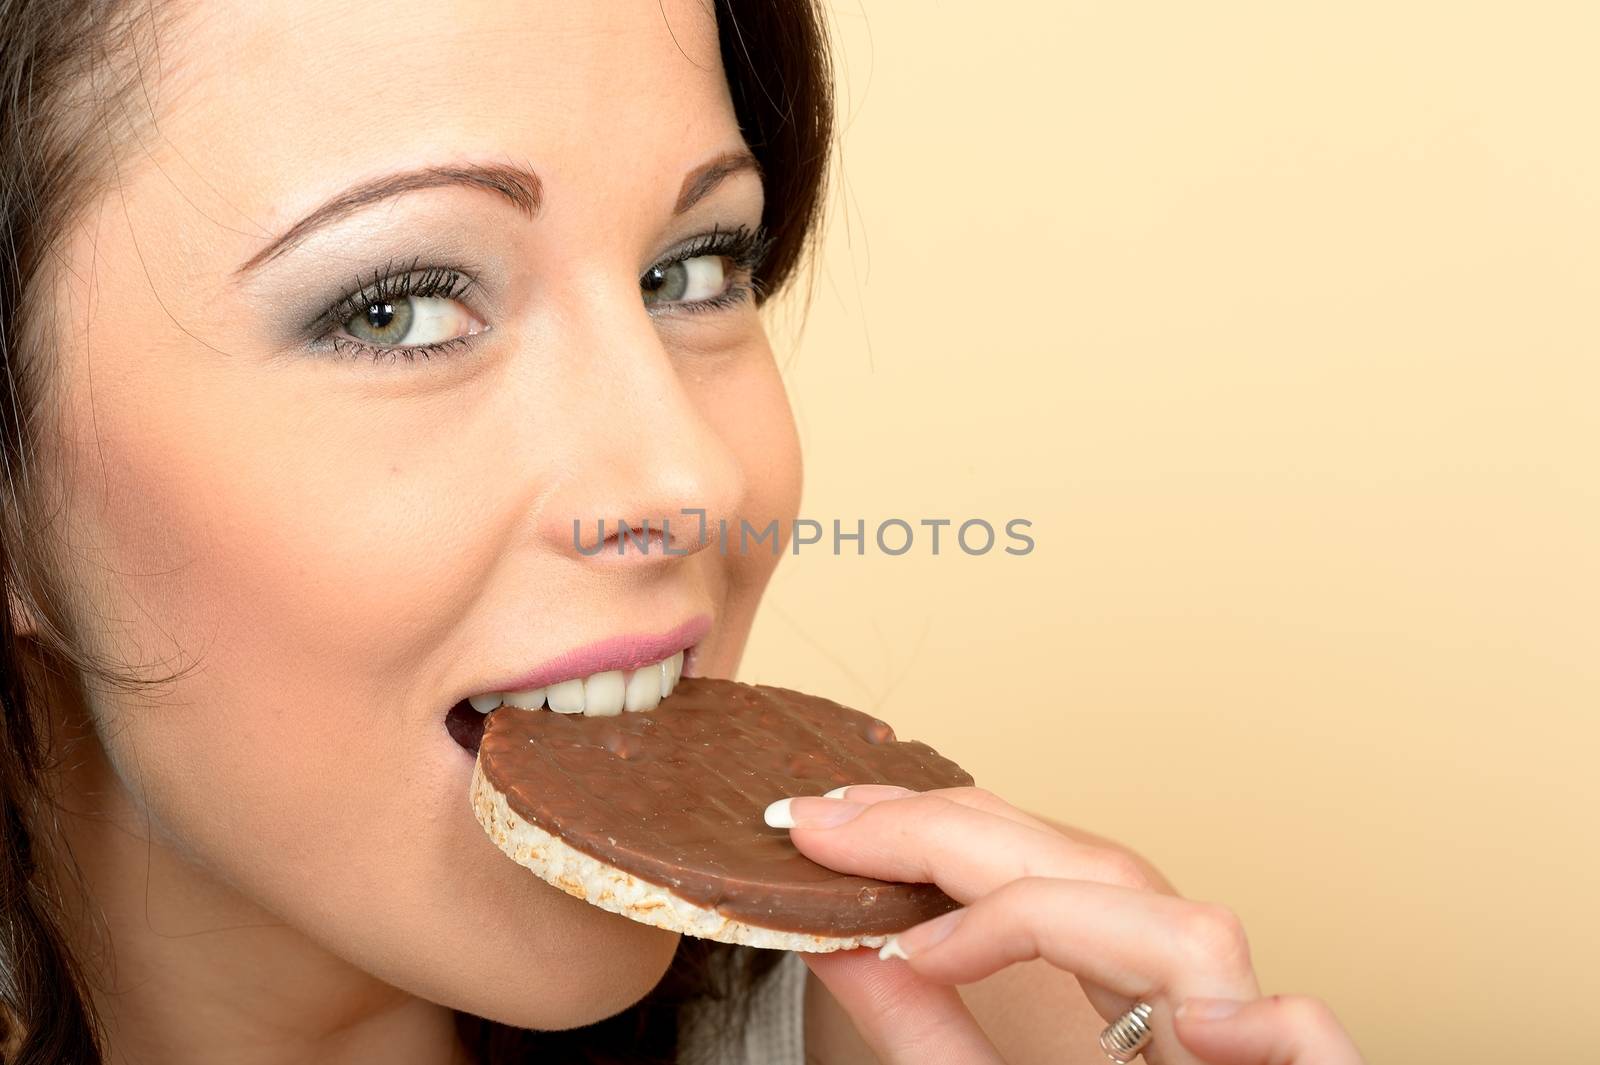 Attractive Beautiful Young Woman Eating a Single Milk Chocolate Covered Rice Cake Biscuit